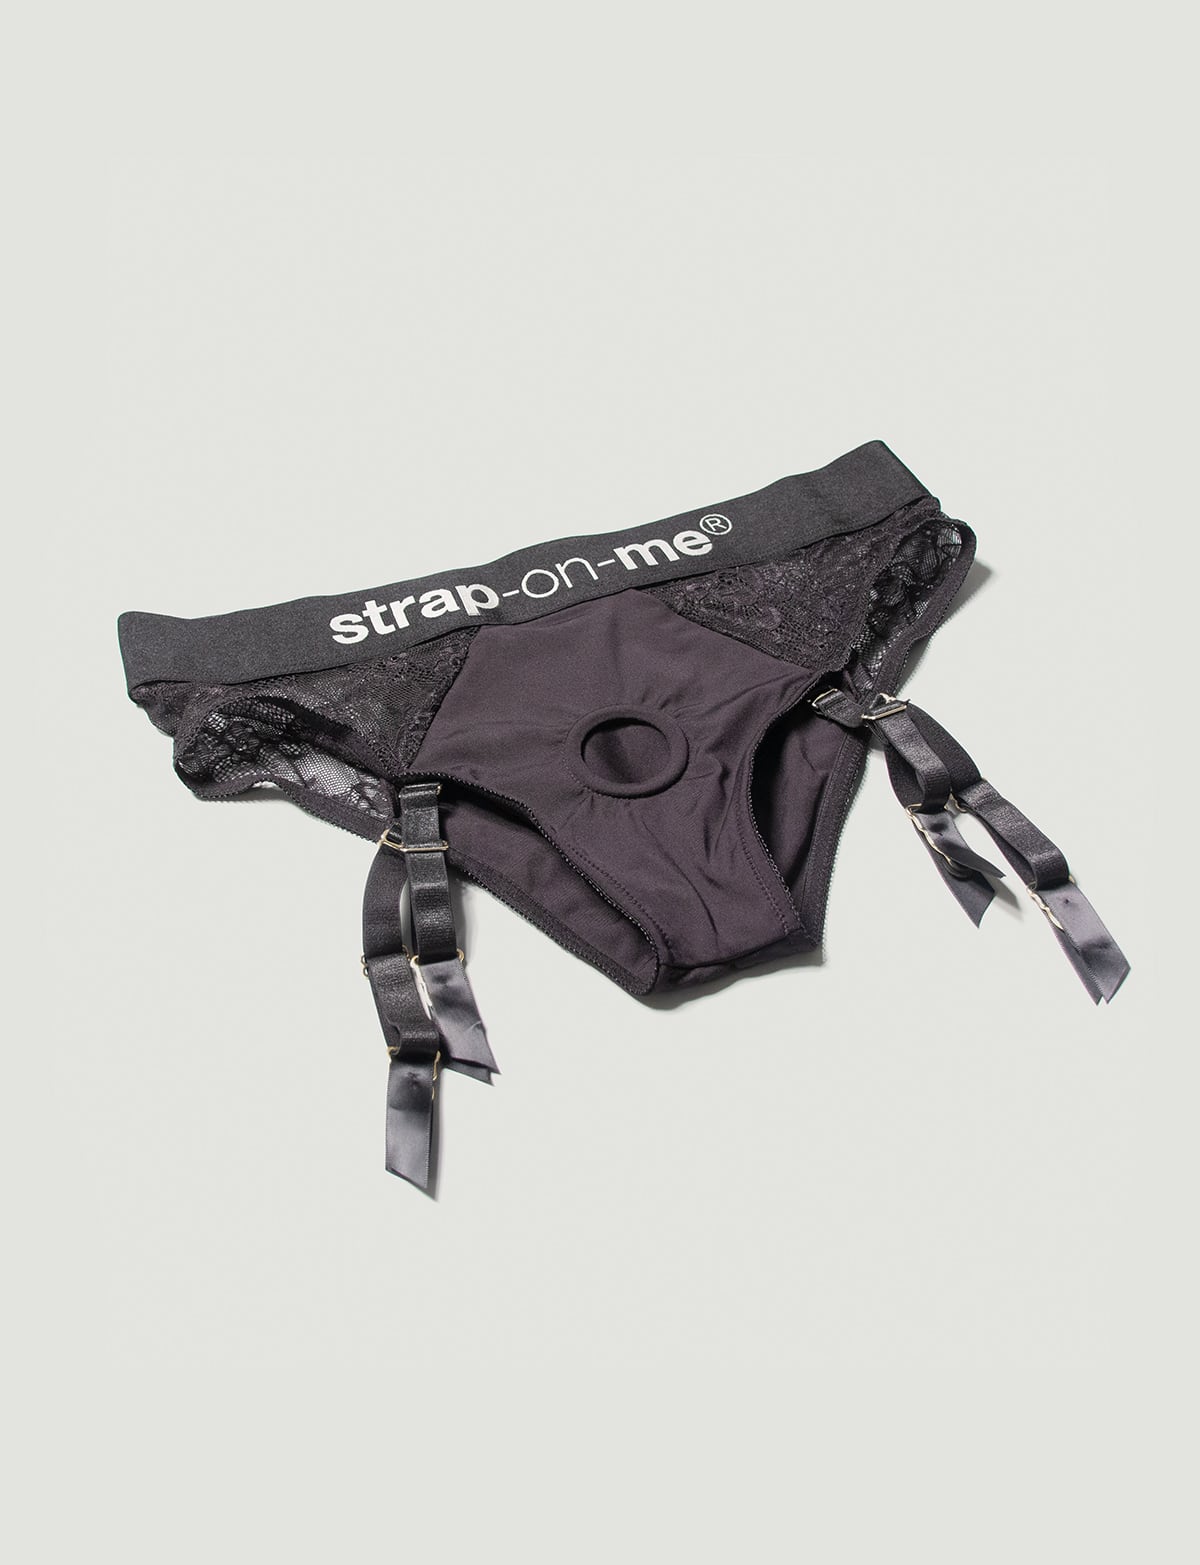 Strap-on-me Diva Harness open-back harness • Afterglo